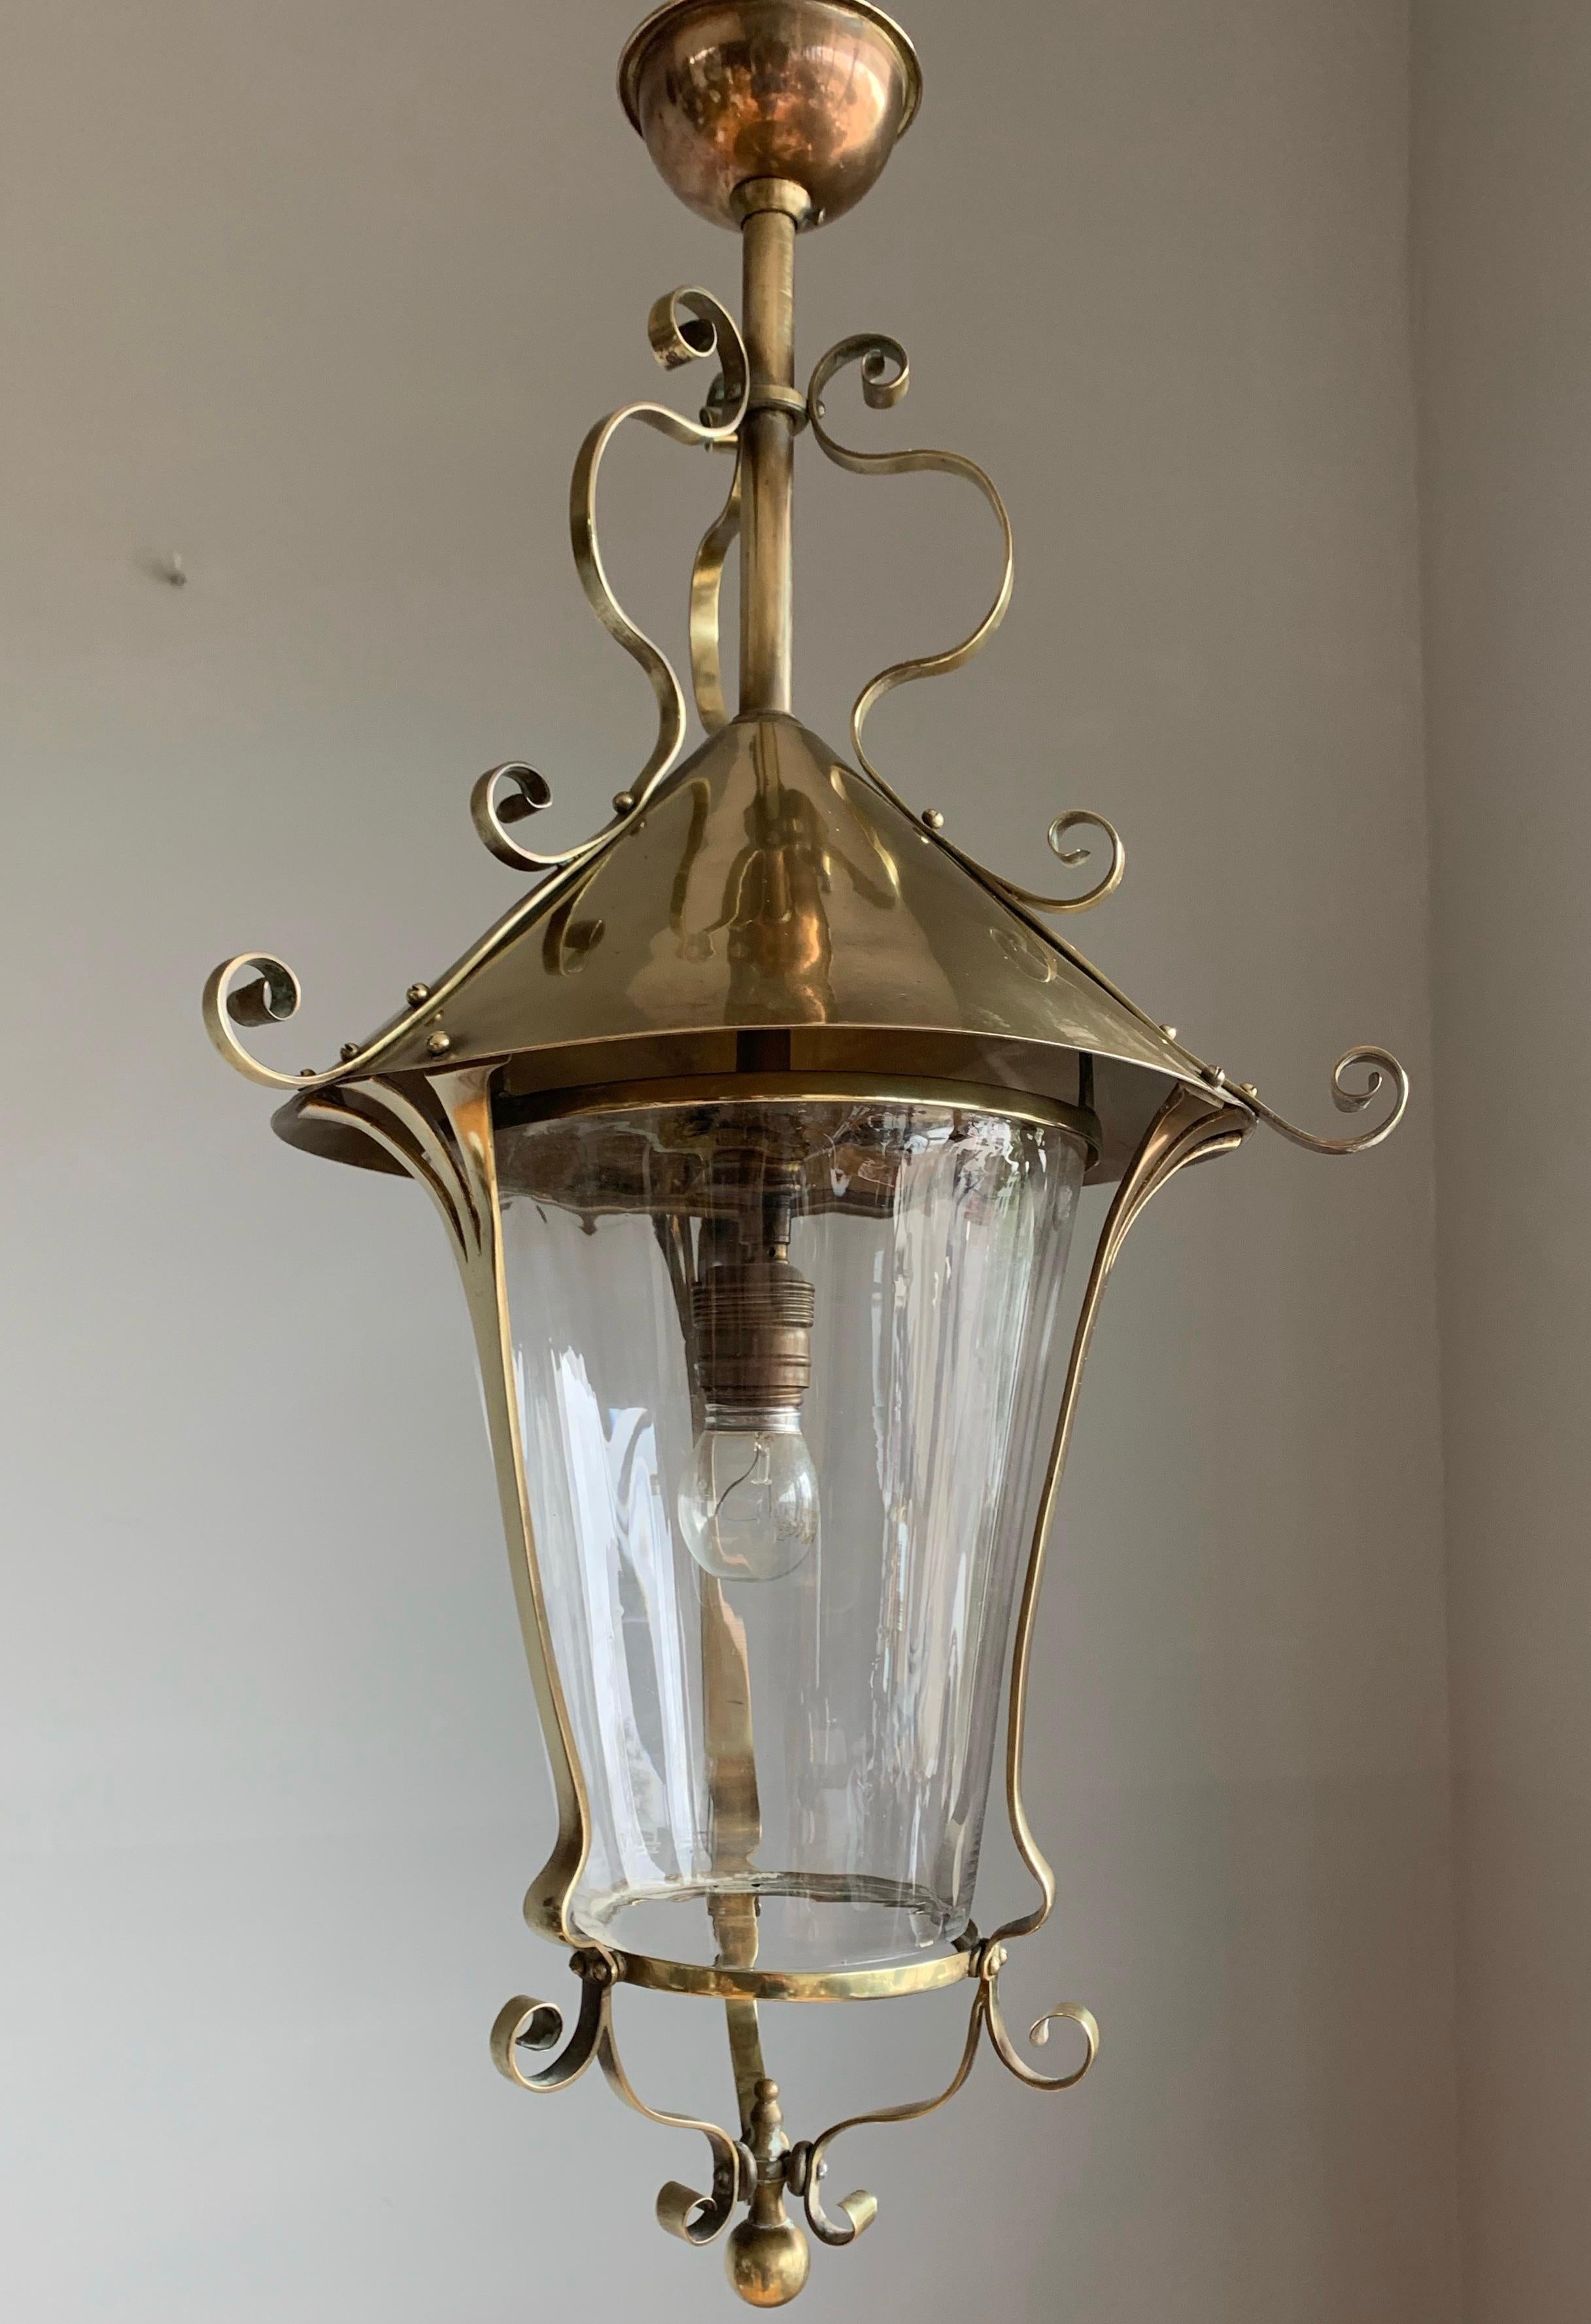 Marvelous design and superbly executed antique pendant.

With early 20th century light fixtures being one of our specialities, finding a unique Arts & Crafts pendant always makes our heart skip a beat. Every designer knows that getting a truly